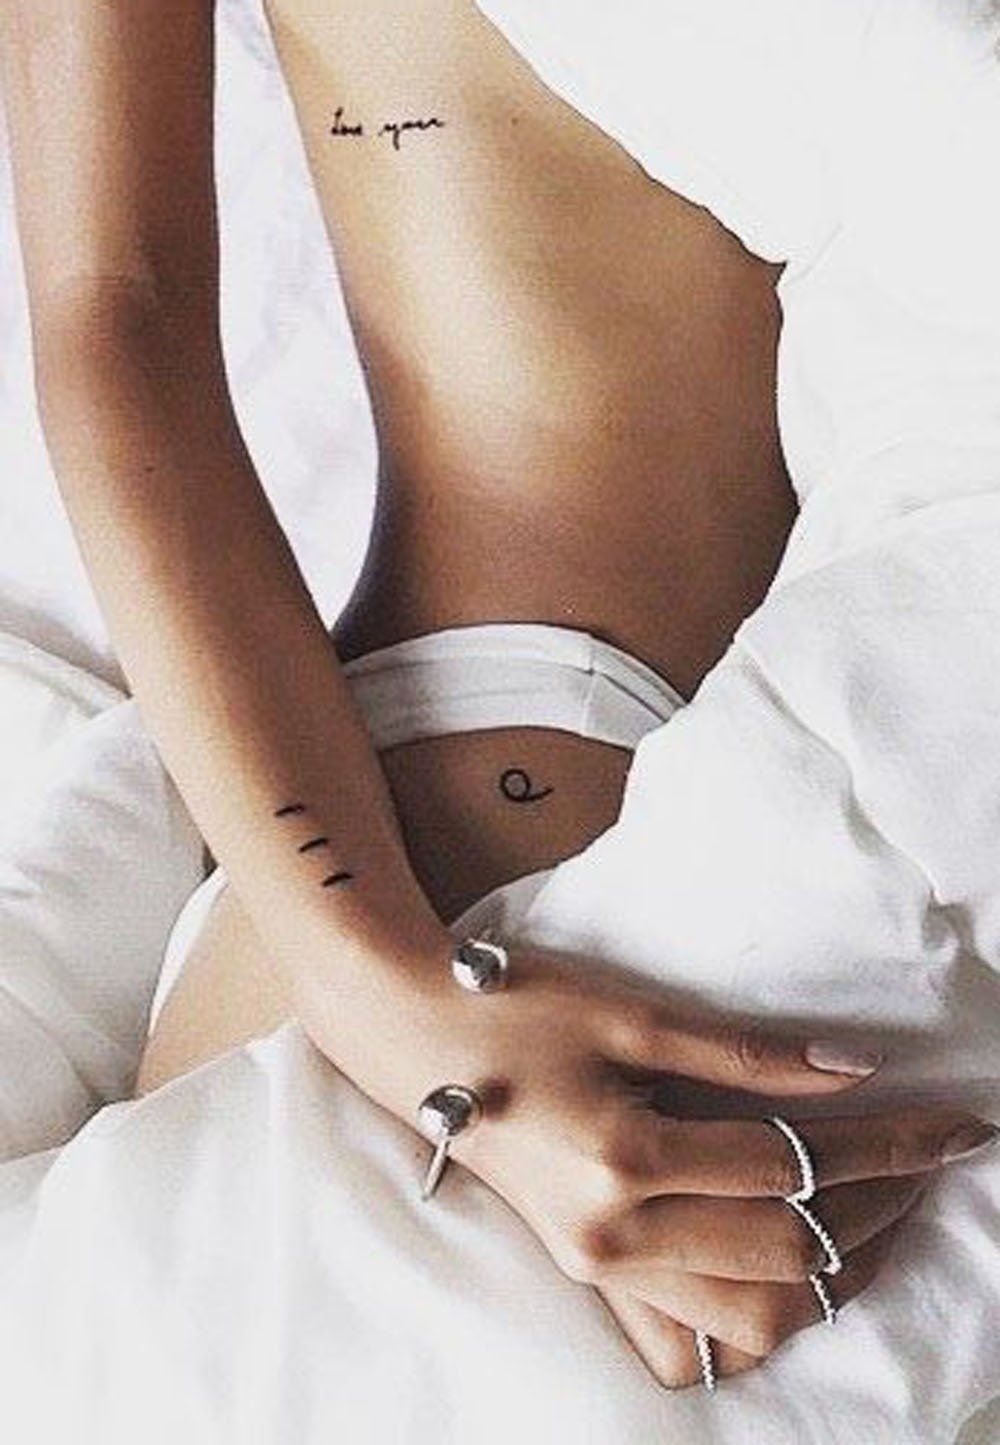 30 of the Top Trending Tattoo Design Ideas of 2018 for Women -   21 girly tattoo fonts
 ideas